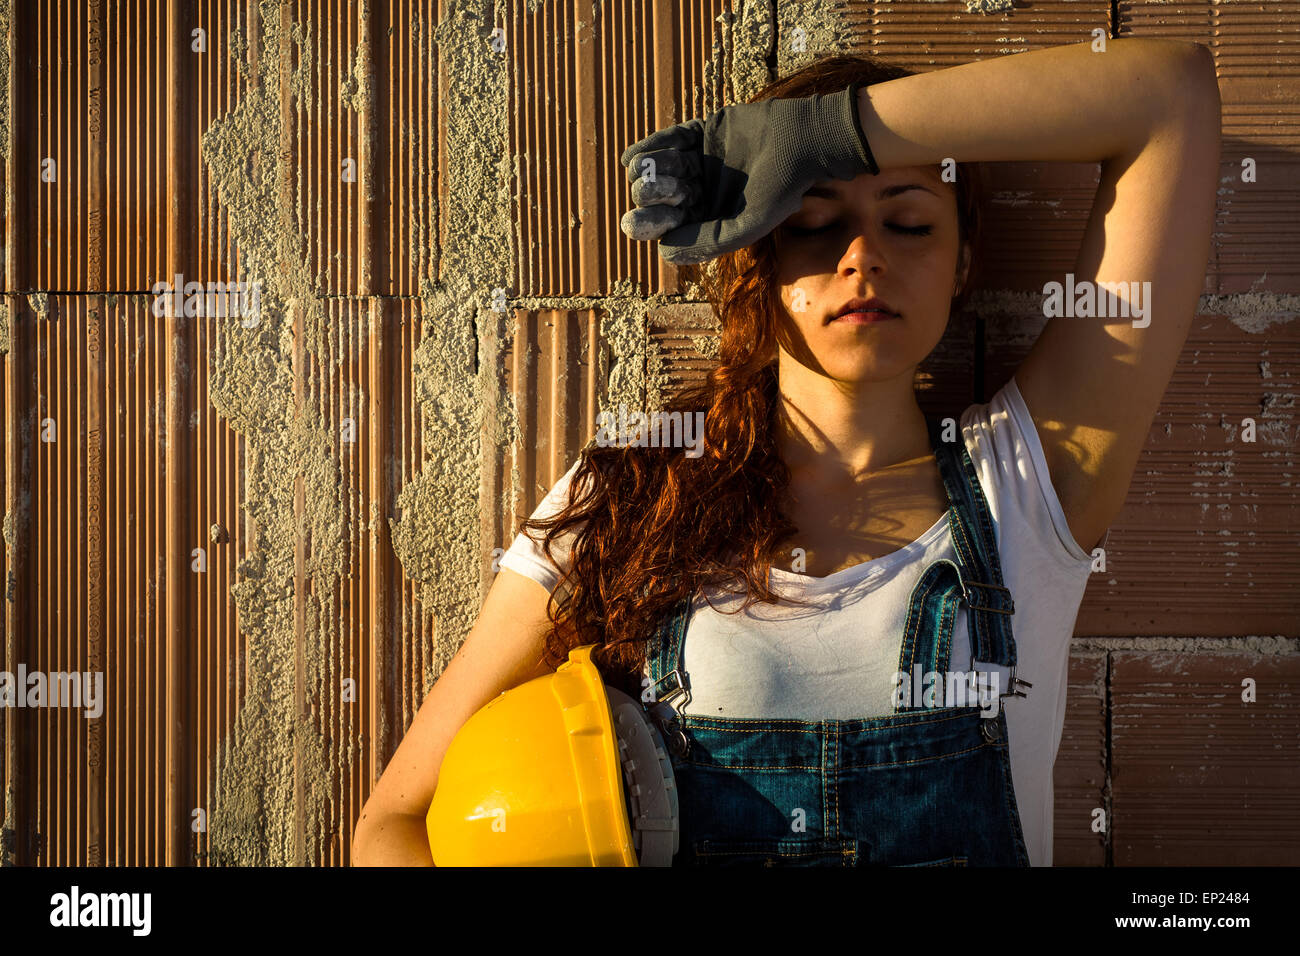 Tired Woman Bricklayer with Overalls and Helmet Standing in Front of a Brick Wall Stock Photo